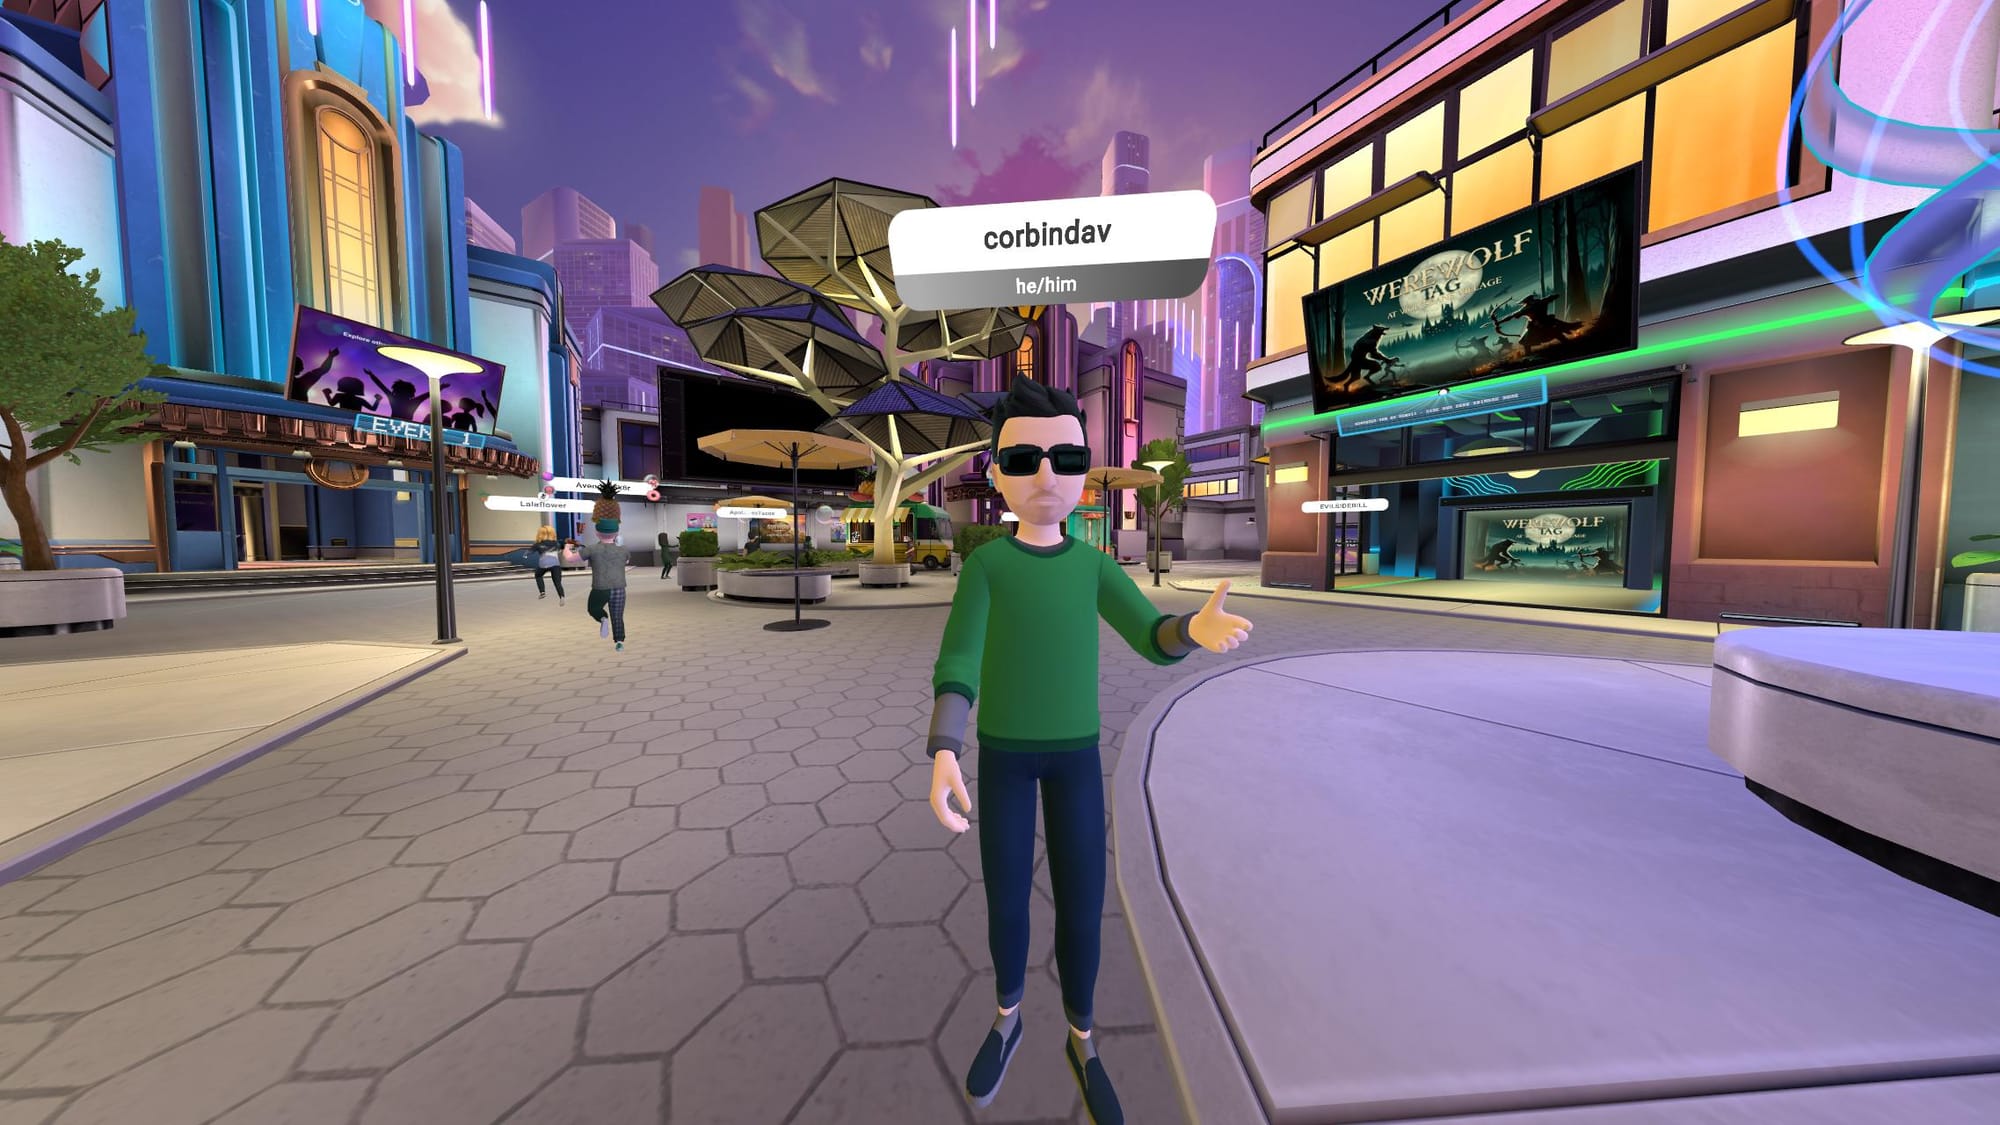 Me in a green shirt giving a thumbs-up in a colorful virtual cityscape.